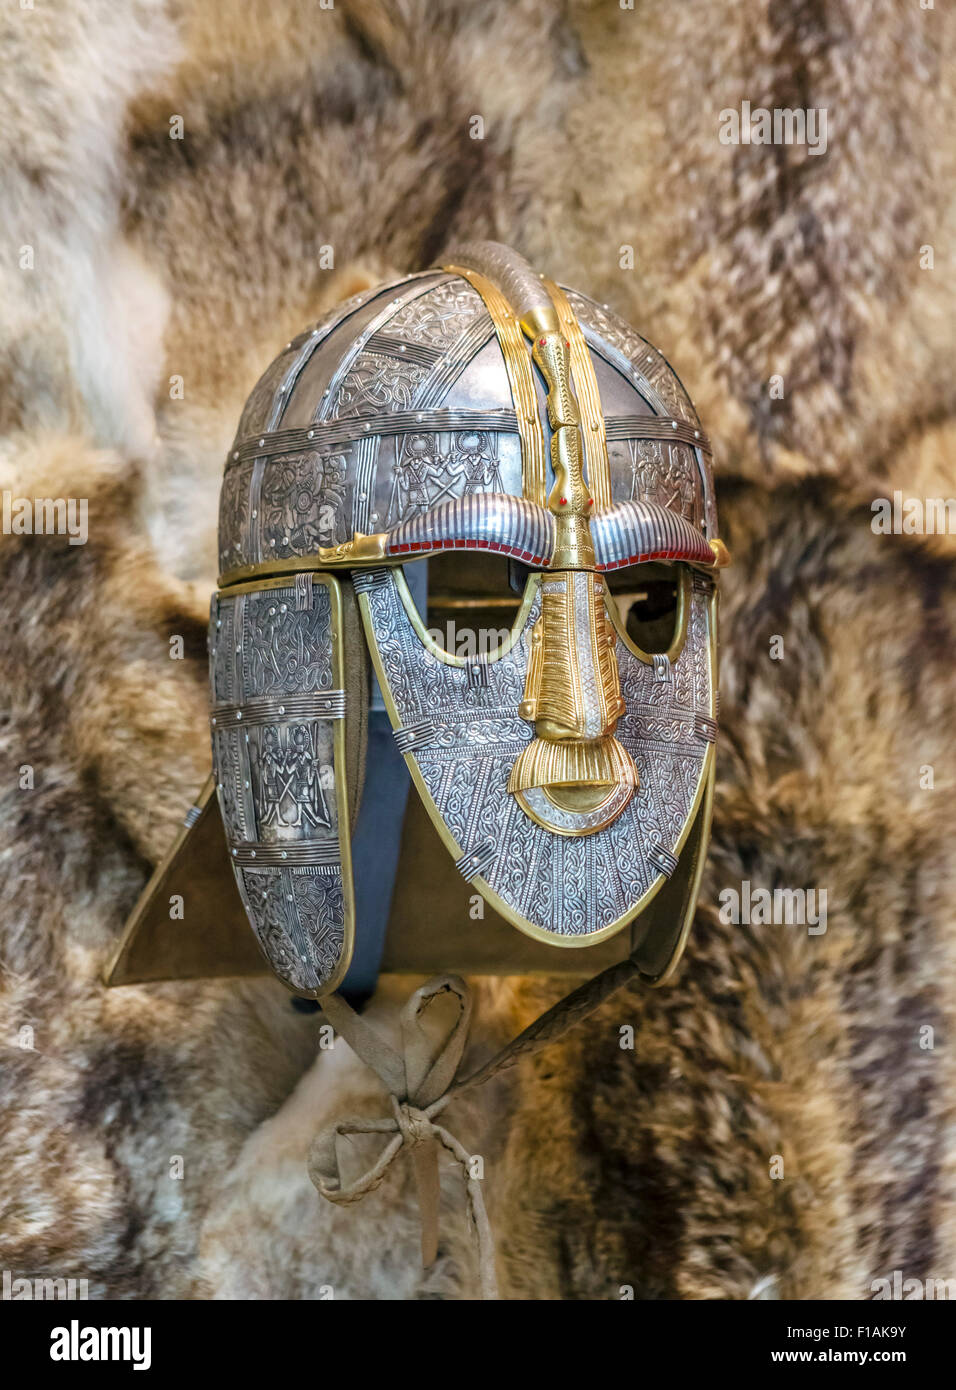 A replica of the Sutton Hoo Helmet in the exhibition hall at Sutton Hoo, Suffolk, England, UK Stock Photo